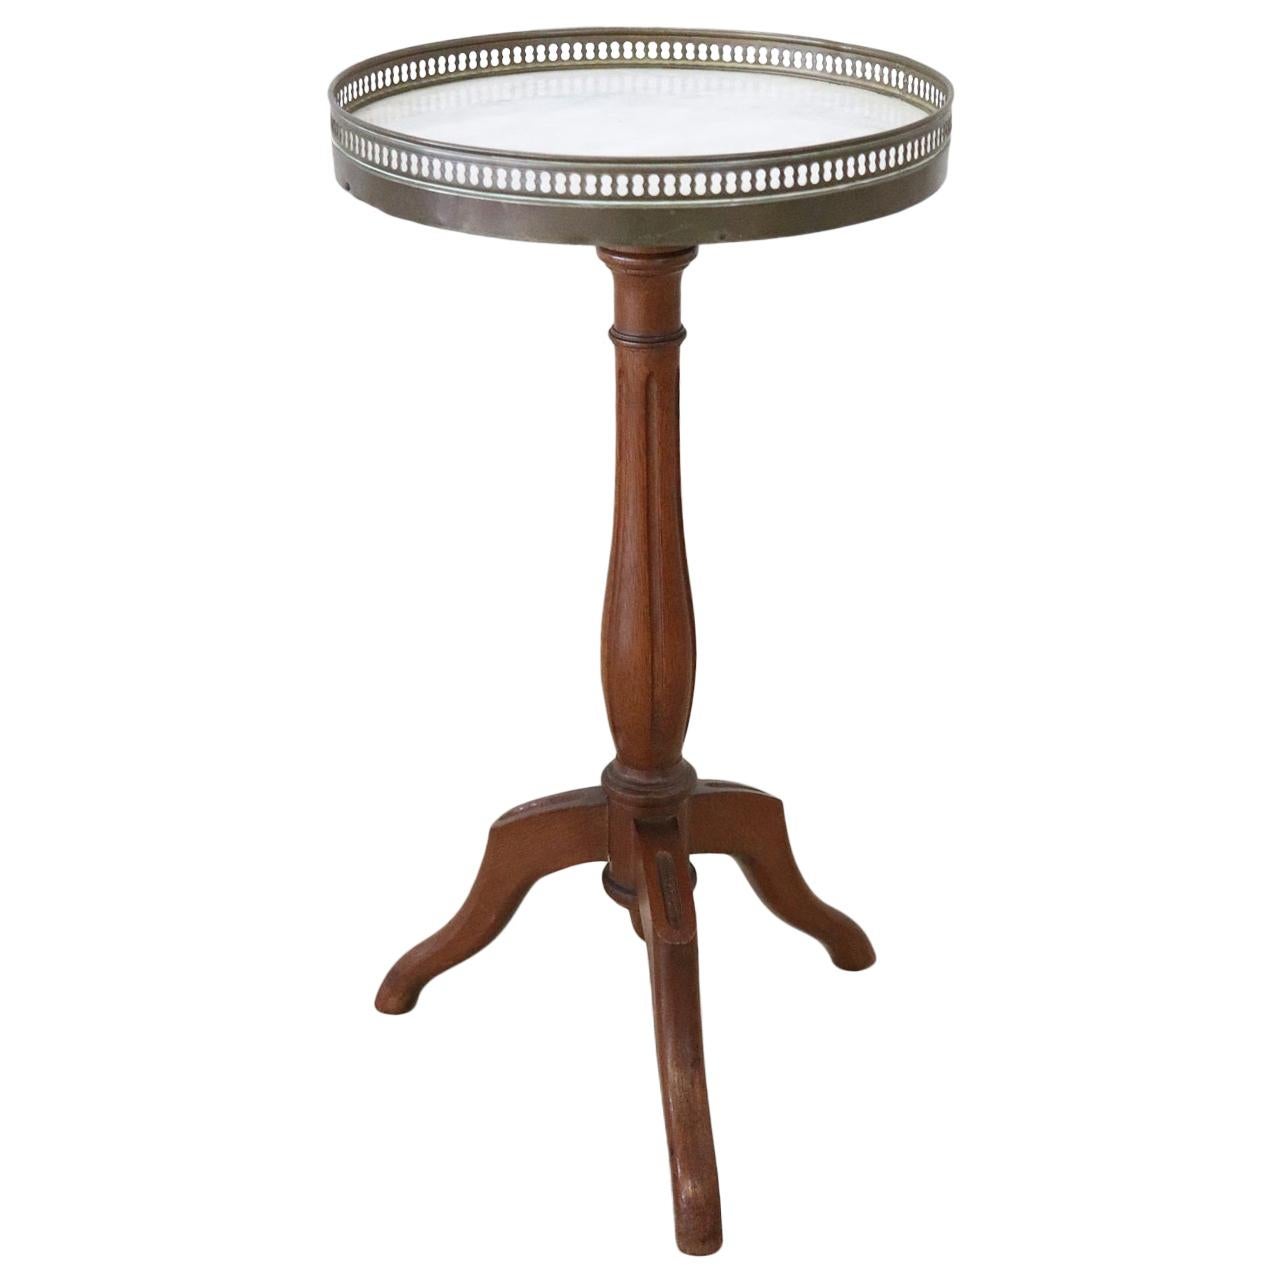 19th Century Italian Walnut Round Side Table, Pedestal Table or Smoking Table